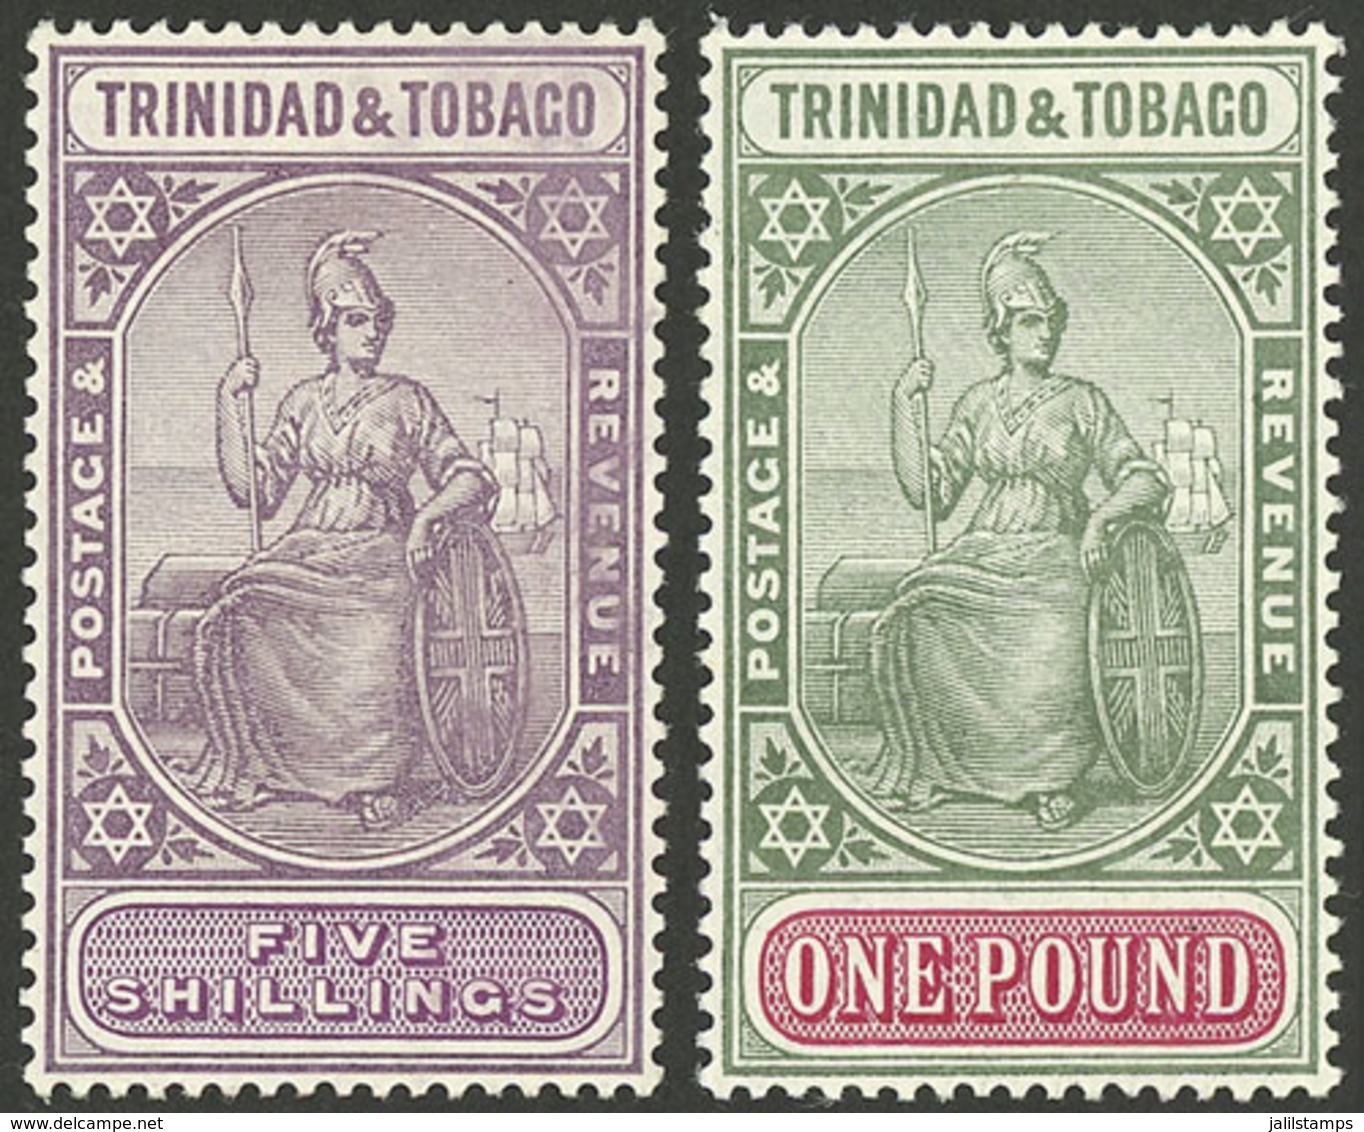 TRINIDAD AND TOBAGO: Sc.19/20, 1921/2 High Values Of The Set, Mint Very Lightly Hinged, Excellent Quality! - Trinidad & Tobago (...-1961)